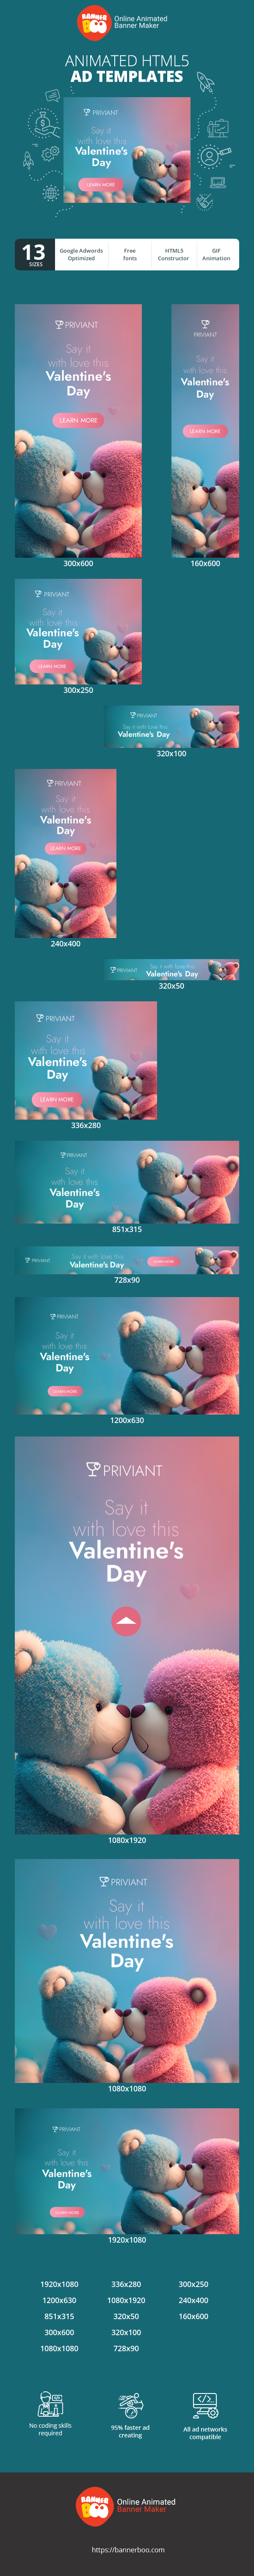 Banner ad template — Say It With Love This Valentine's Day — Valentine's Day